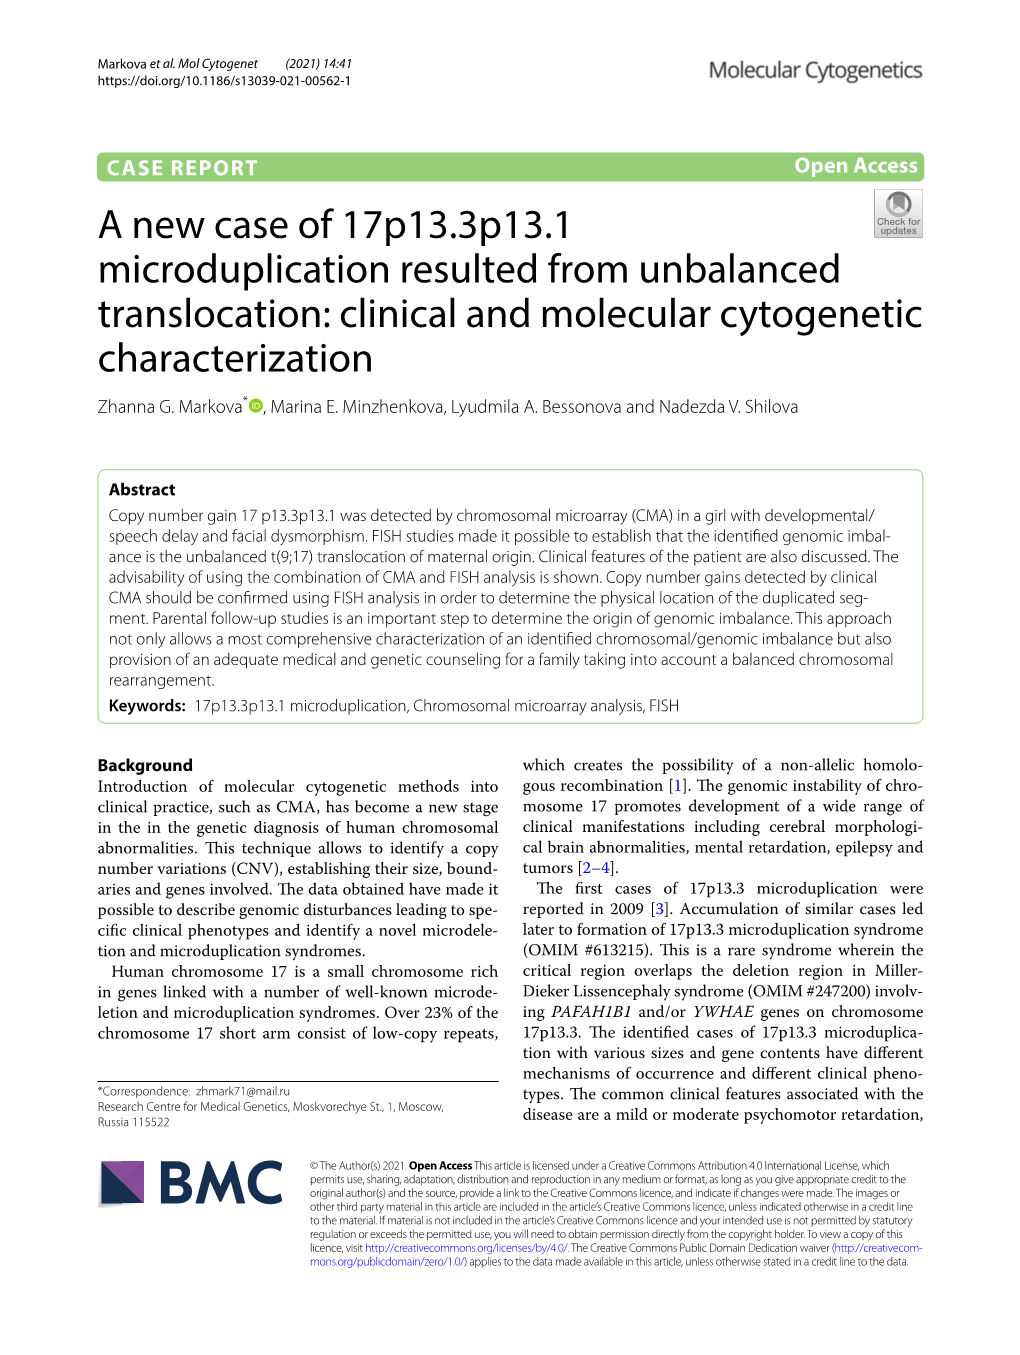 A New Case of 17P13.3P13.1 Microduplication Resulted from Unbalanced Translocation: Clinical and Molecular Cytogenetic Characterization Zhanna G